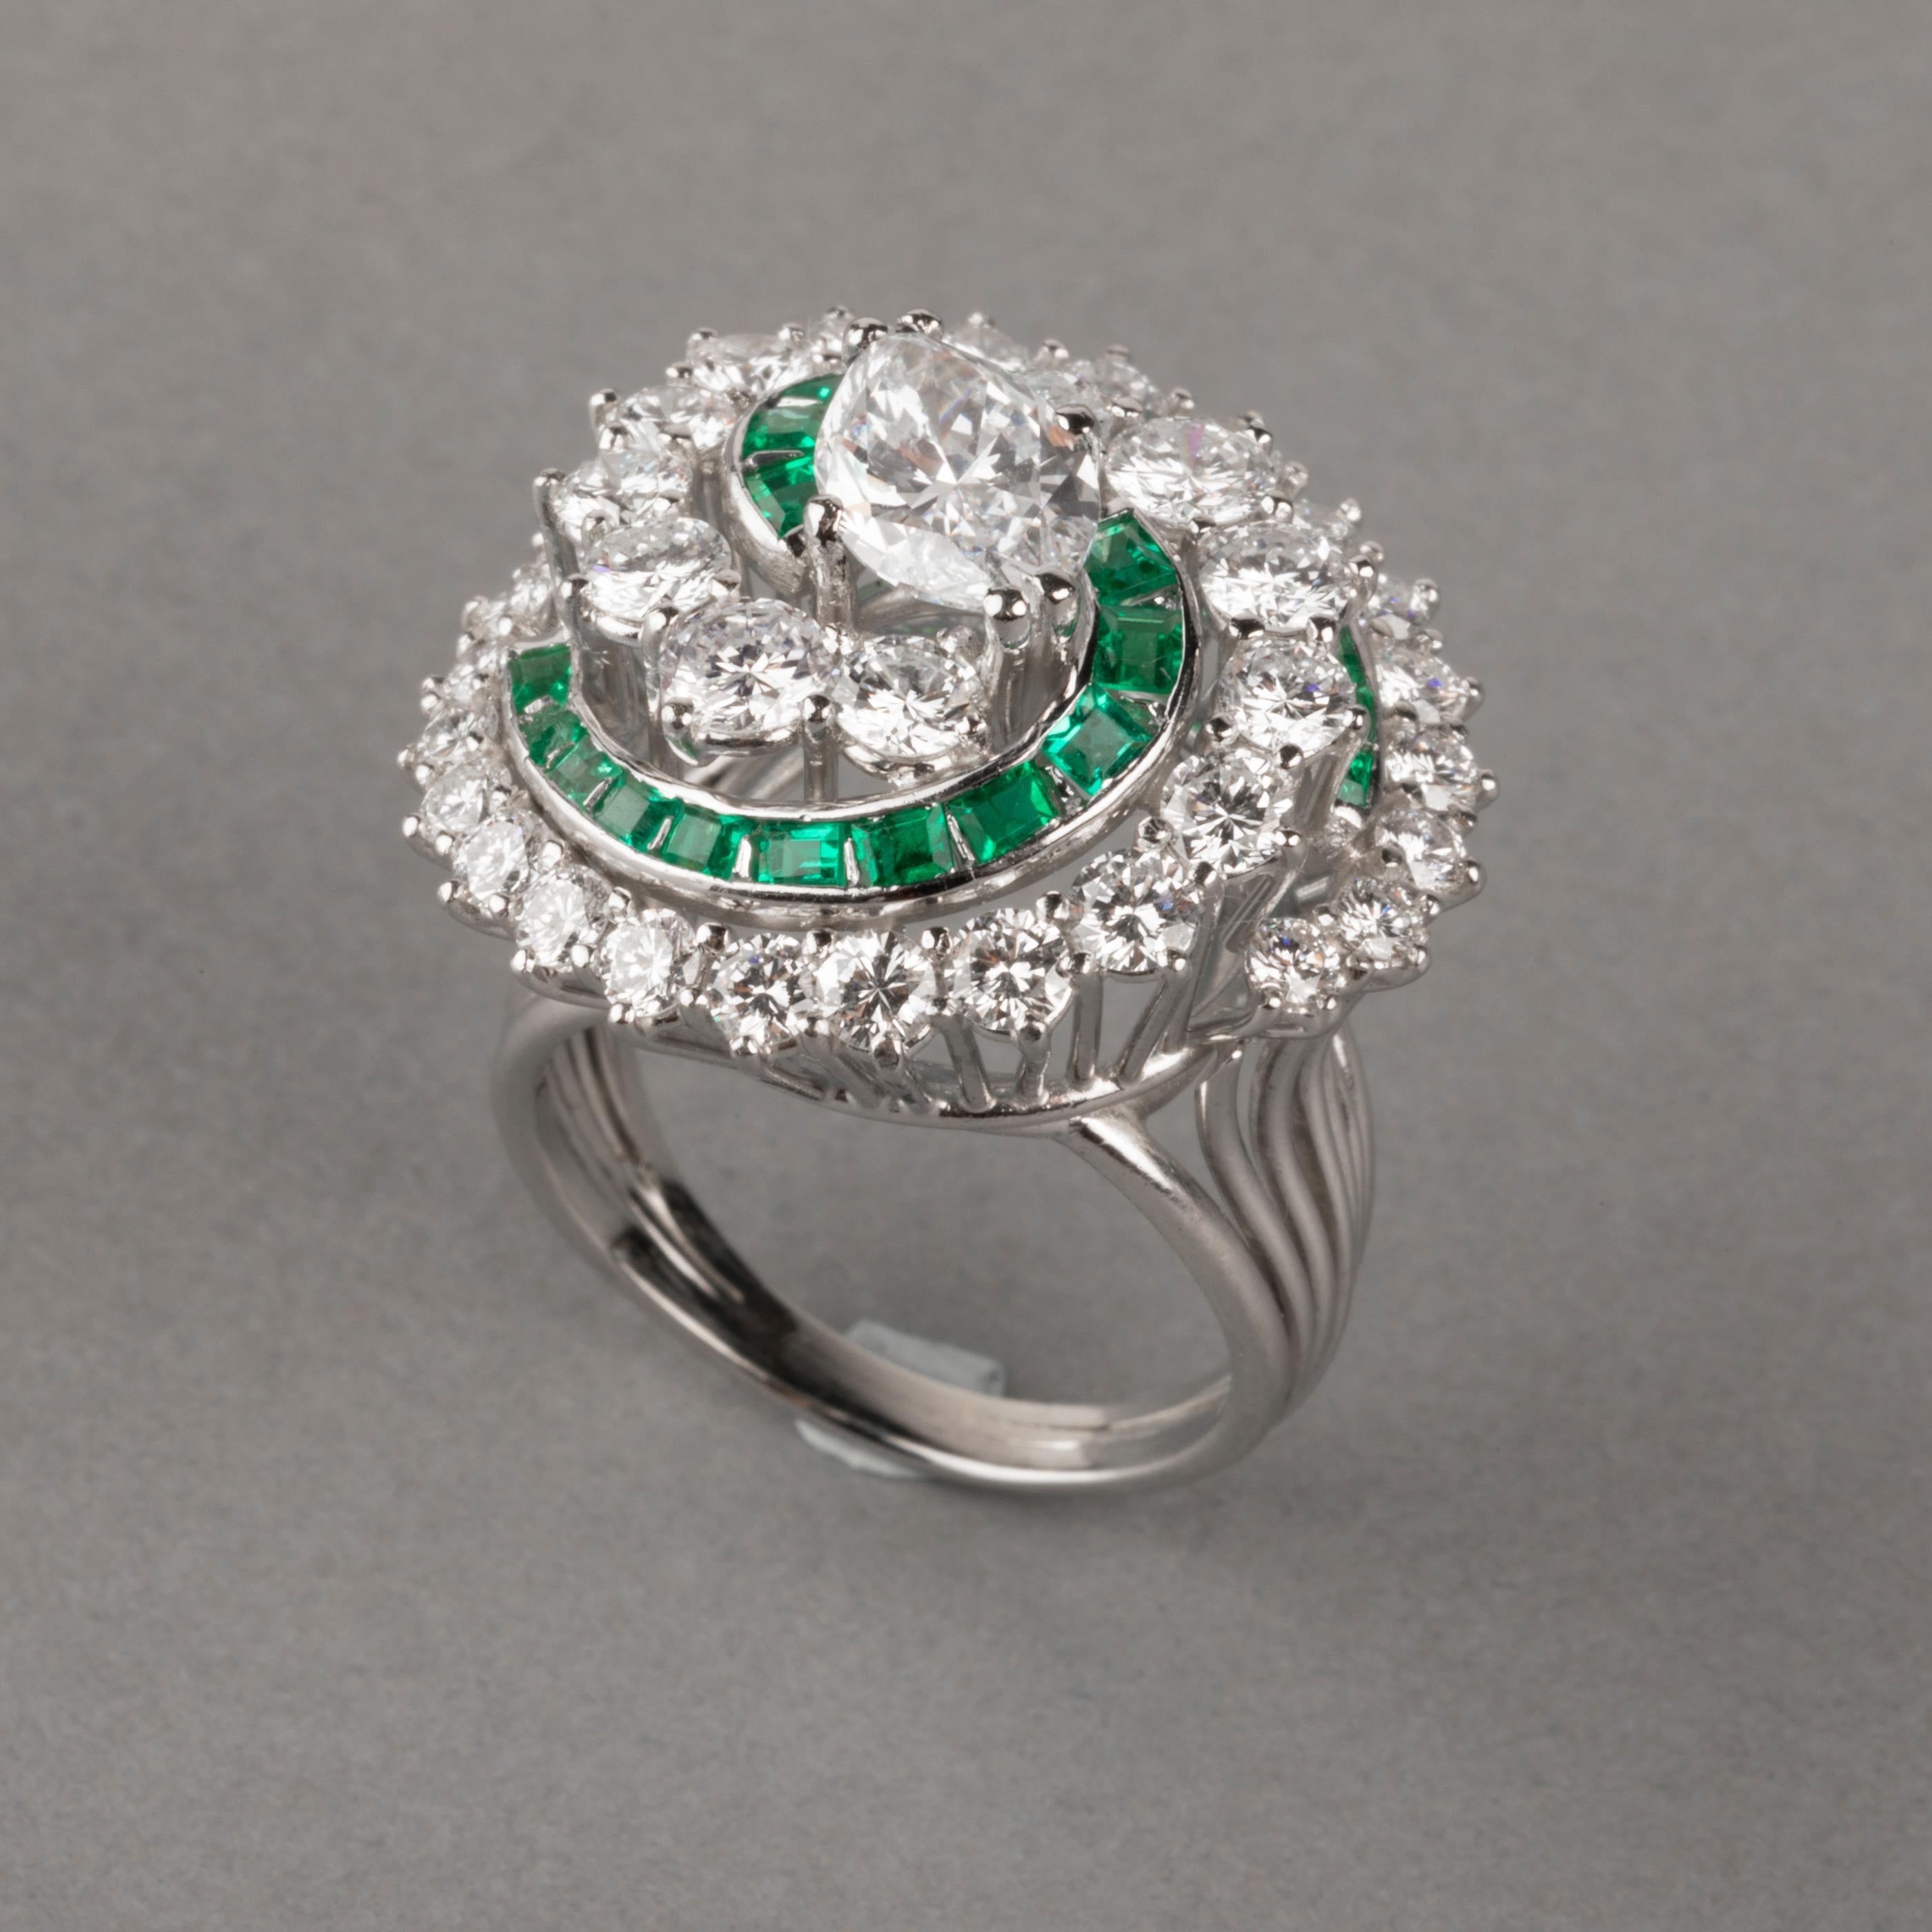 Certified 1.24 Carat Dvs2 Diamond and Emeralds French Cocktail Ring For Sale 2